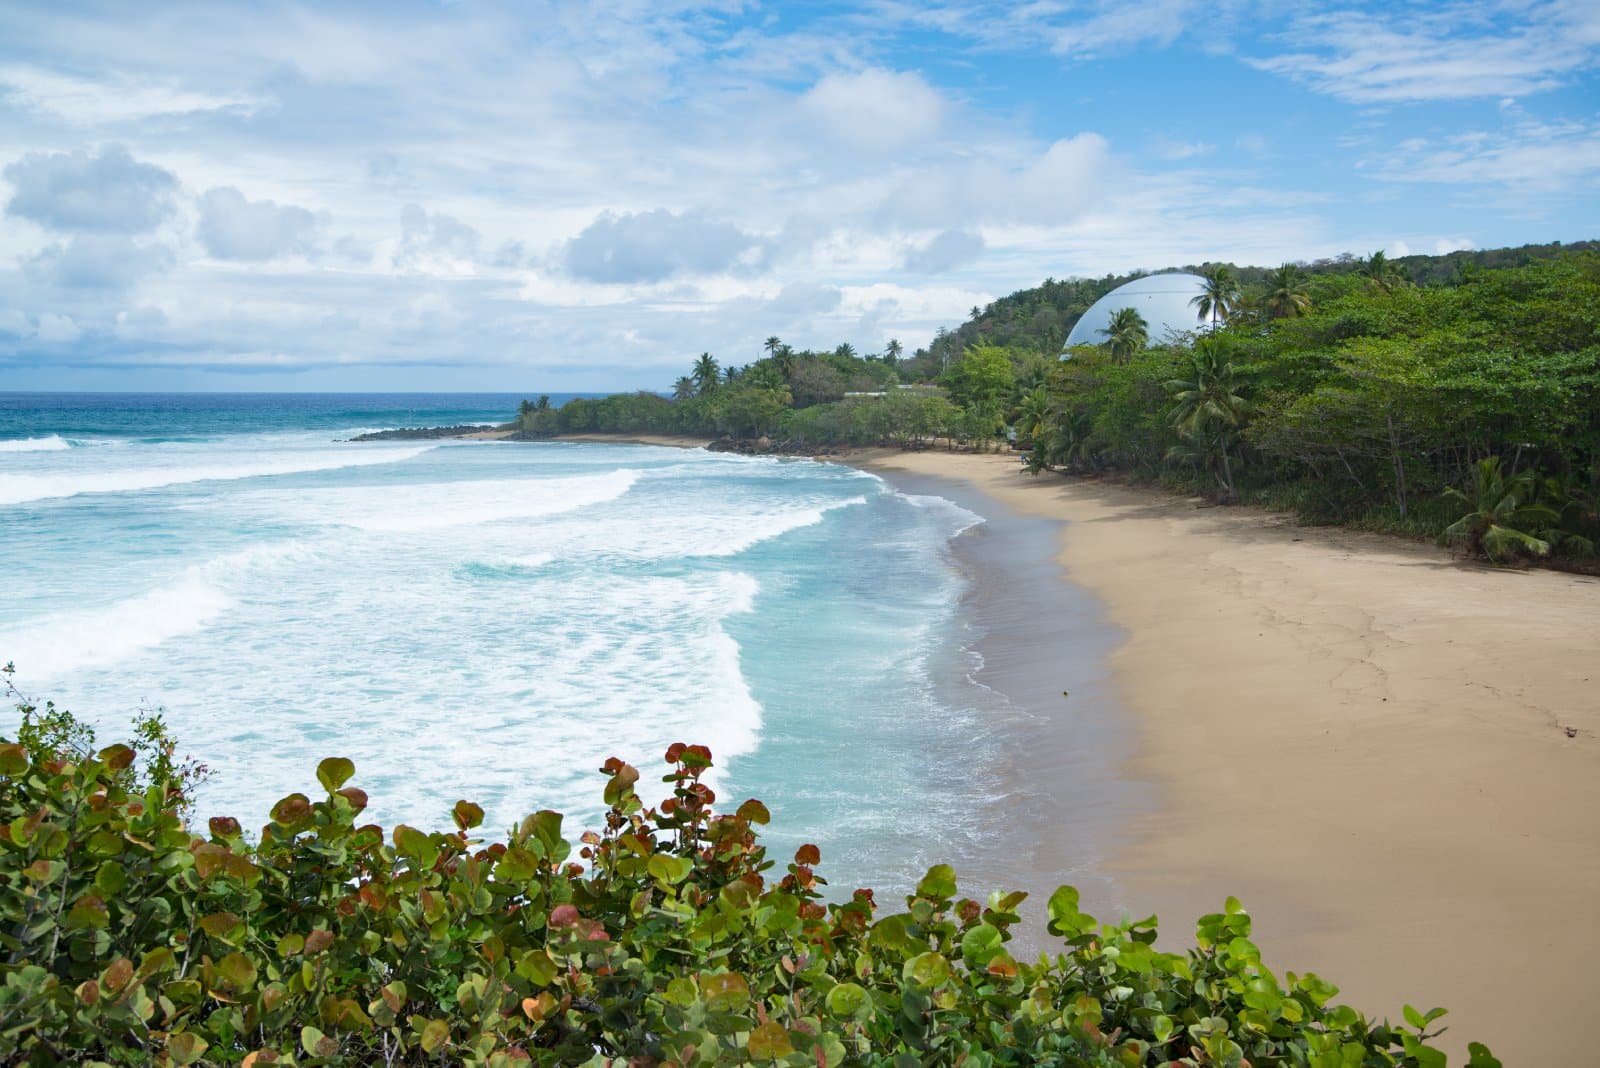 <p class="wp-caption-text">Image Credit: Shutterstock / Discover Marco</p>  <p>Escape to the Caribbean and discover the hidden gem of Rincon, Puerto Rico. With its consistent swells and mellow vibes, this epic break is perfect for surfers of all skill levels. Whether you’re carving up the face or hanging loose in the lineup, Rincon offers endless waves and endless stoke.</p>